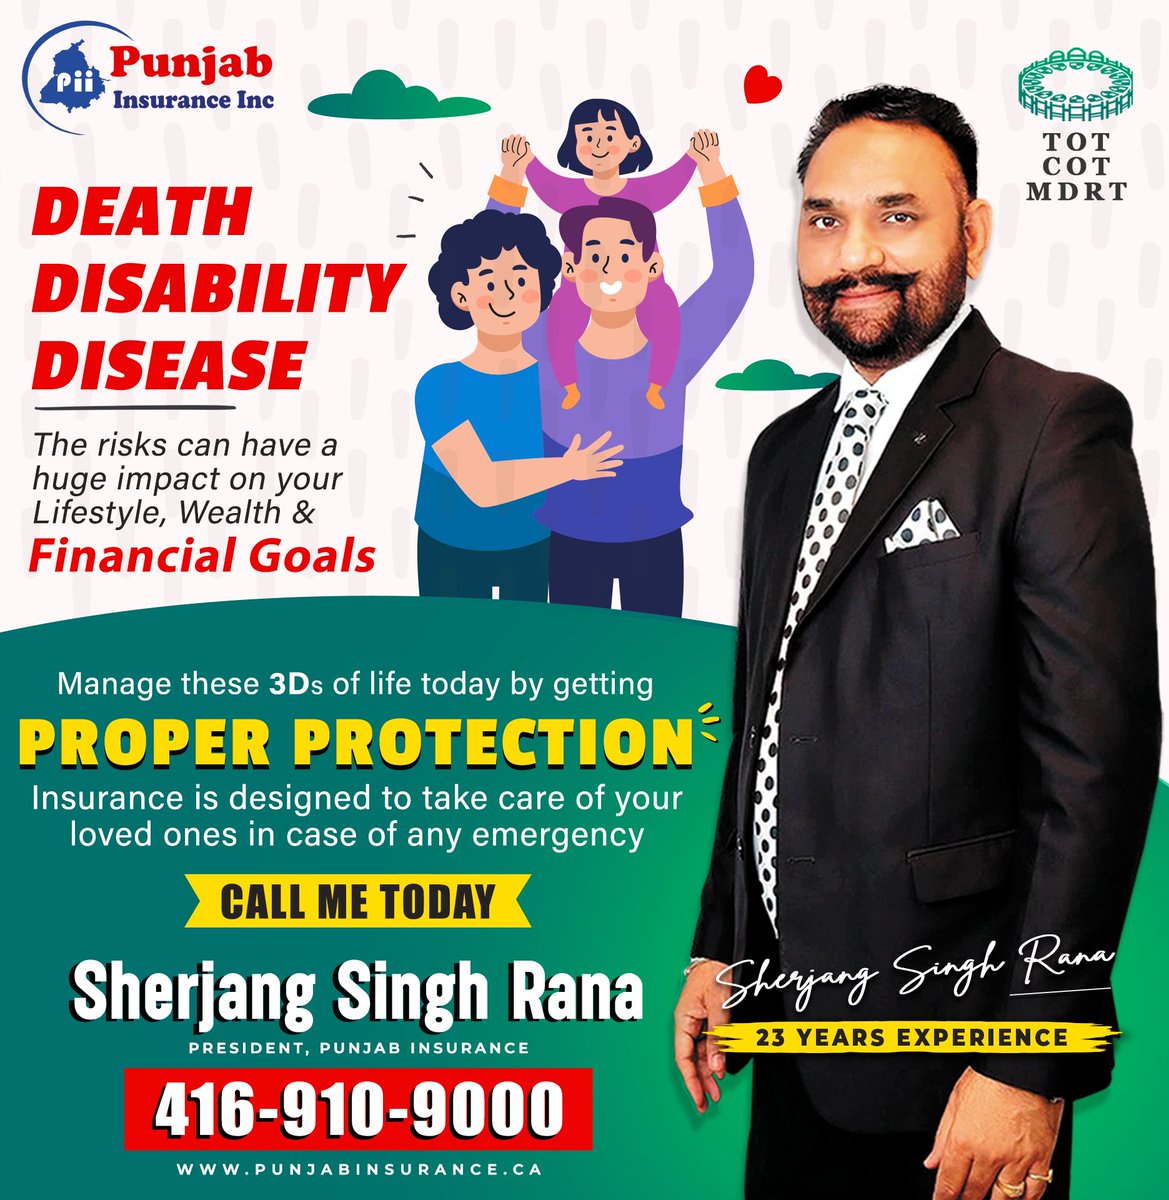 LIFE IS UNPREDICTABLE - ALWAYS STAY COVERED!

Cover yourself for all the risks of life with appropriate Insurance Plans. Never trust on fate, stay covered always!

#SherjangSinghRana #PunjabInsurance #TravelInsurance #Grants #Brampton #Montreal #Winnipeg #Ontario #Ottawa #Canada